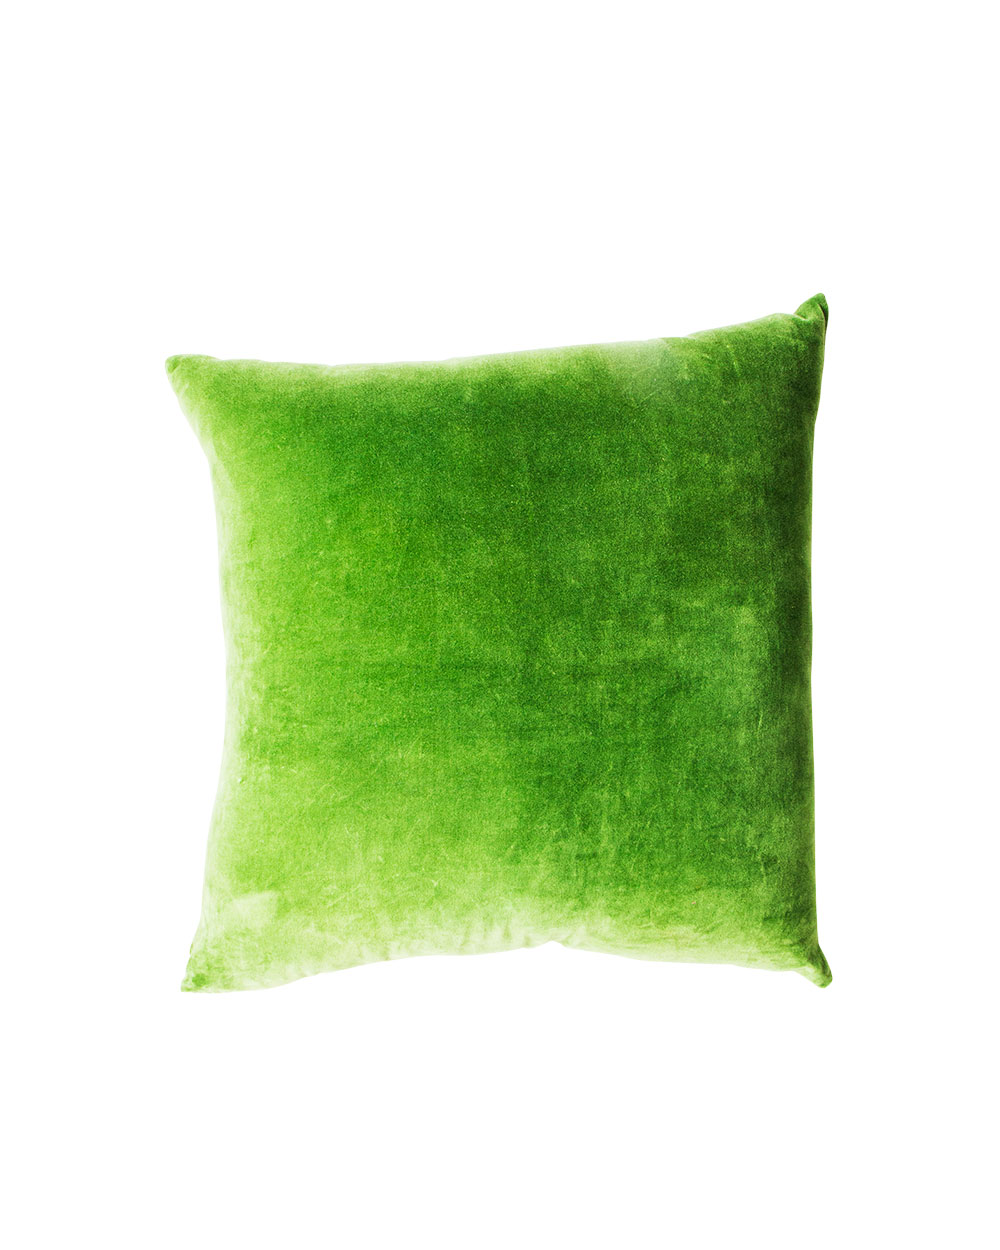 French Country Collections cushion, $69. Ph: 09 950 9398